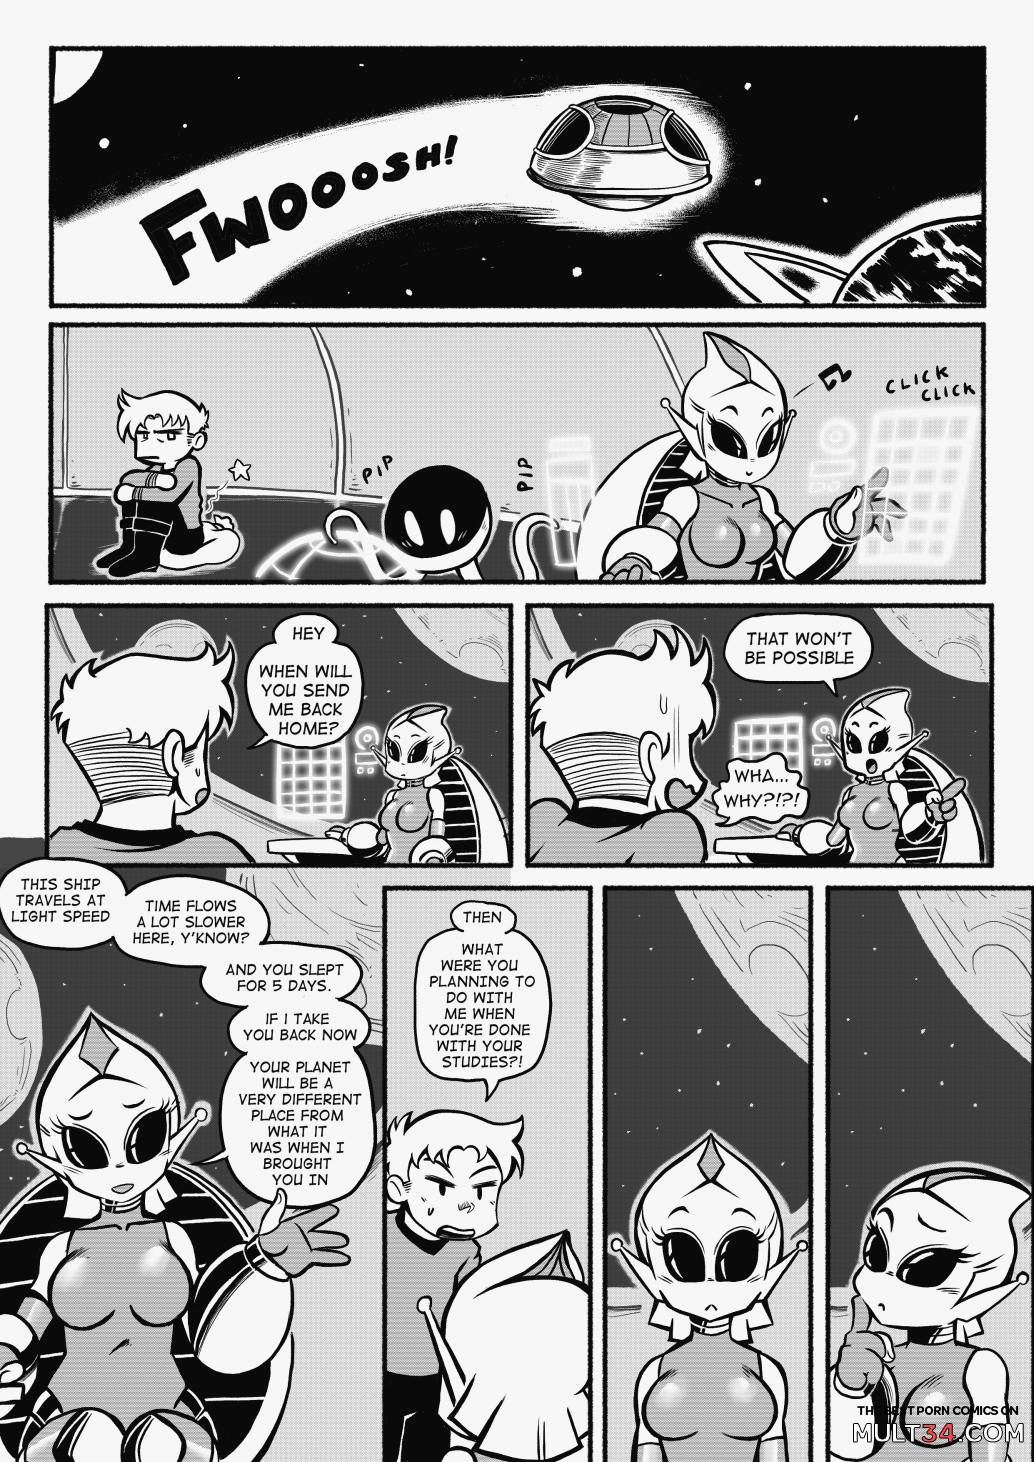 Abducted! - Mr.E page 9